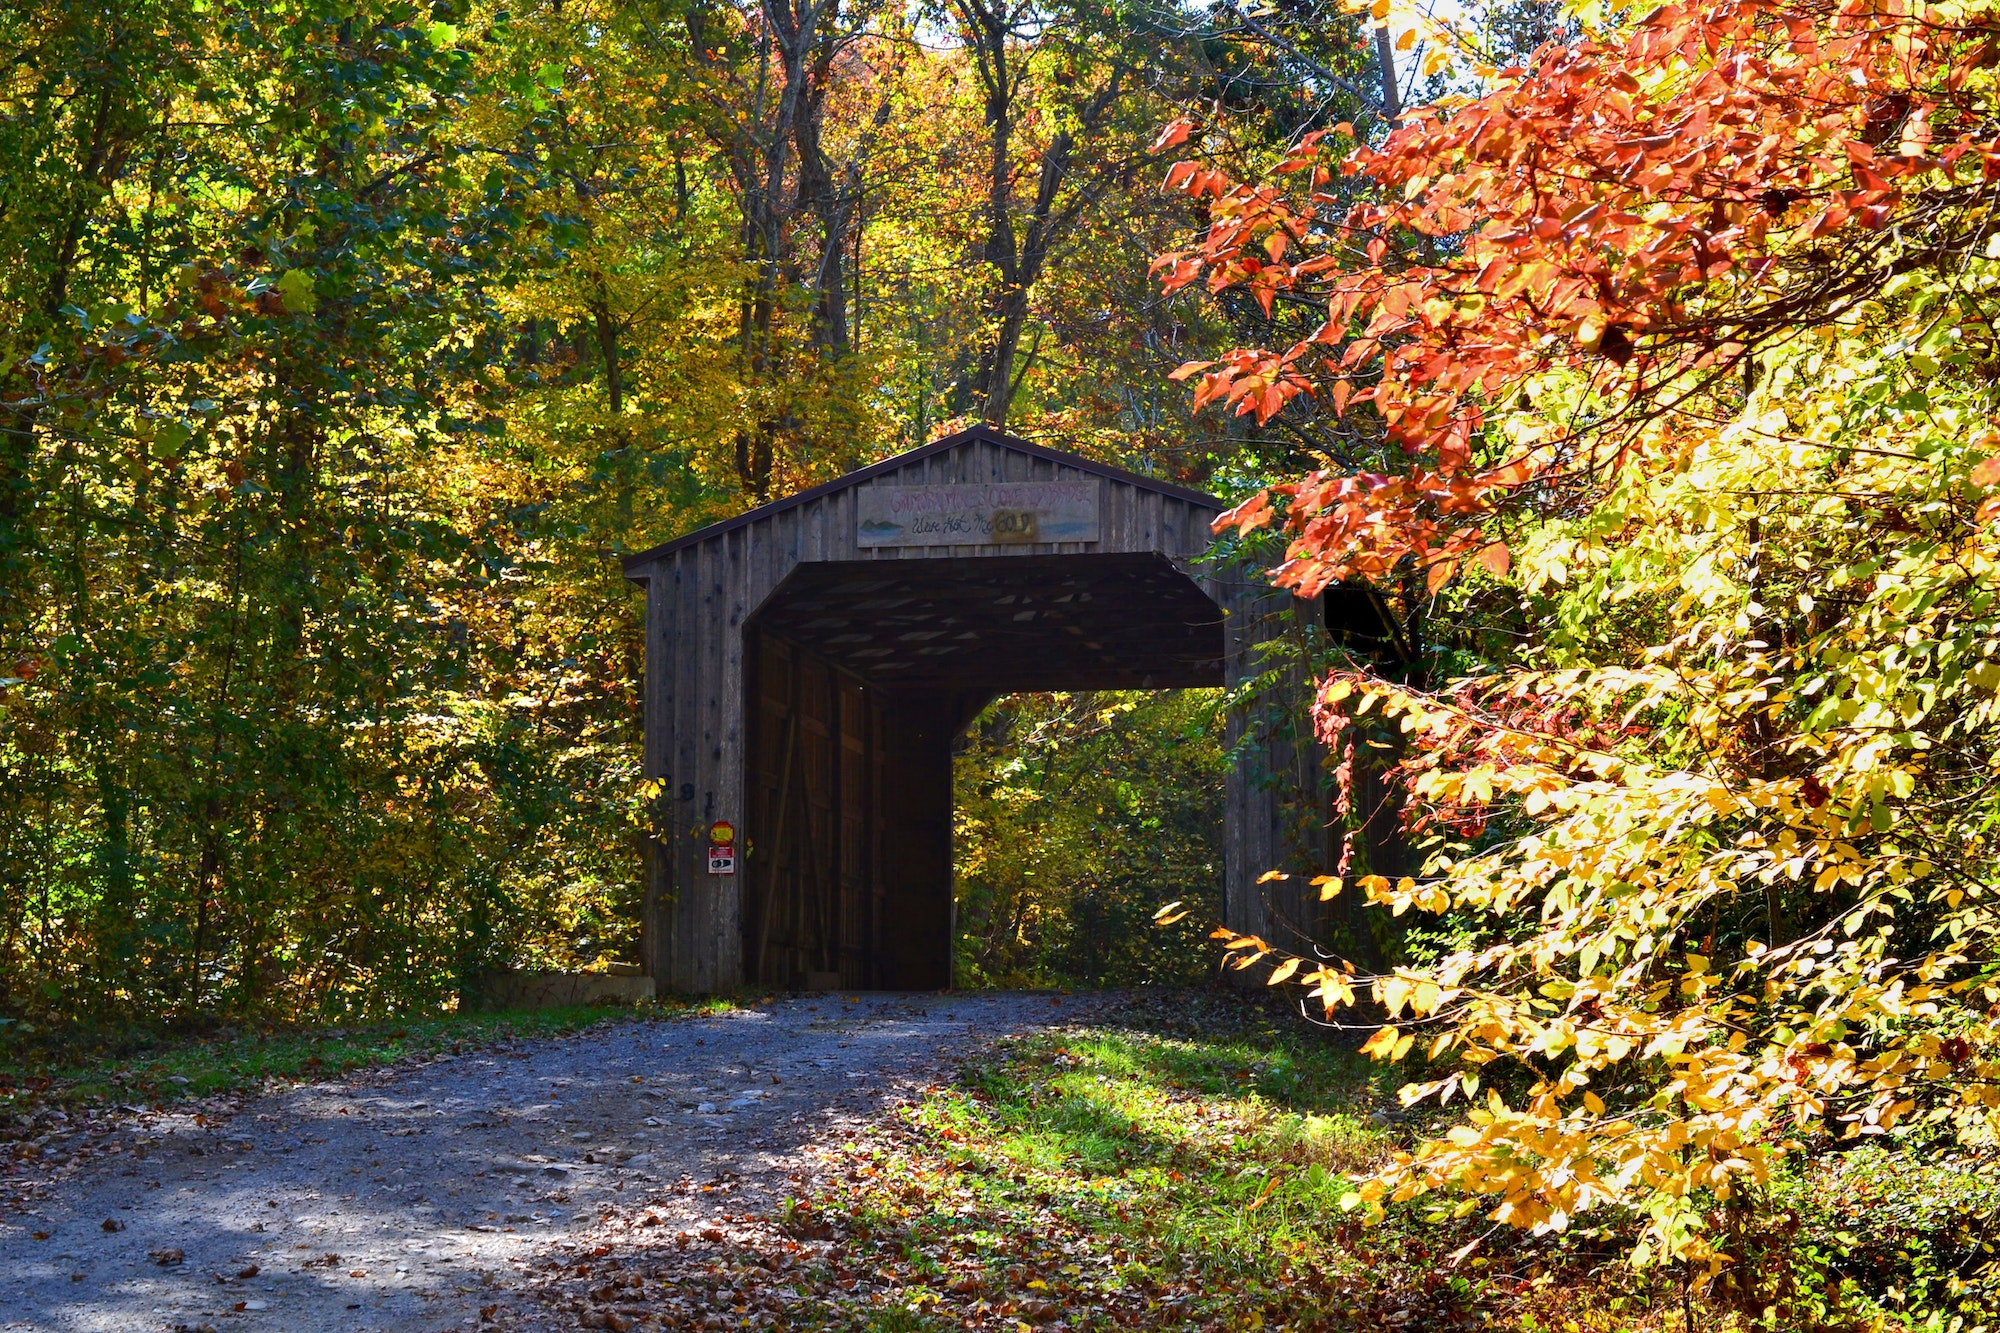 An old wooden covered bridge in the woods full of autumn leaves and fall foliage